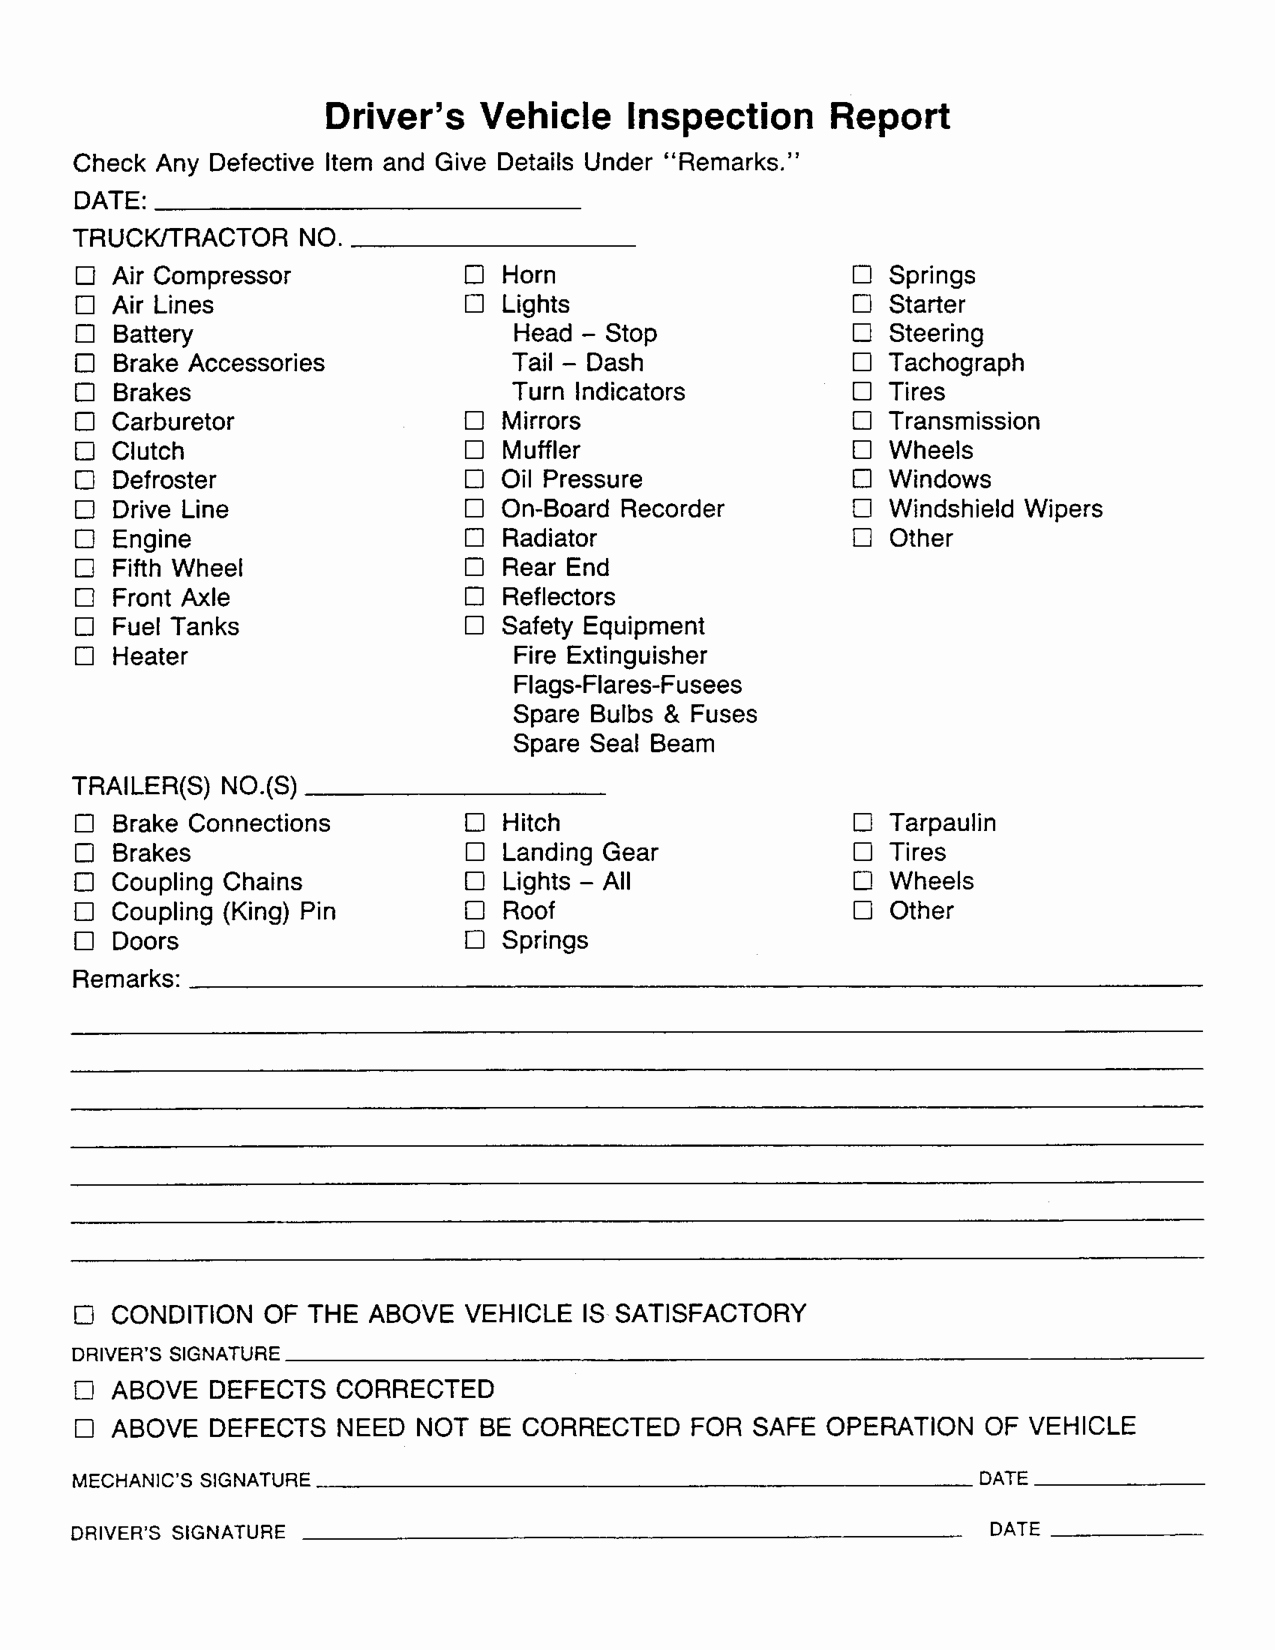 Free Vehicle Inspection form Template Awesome Drivers Vehicle Inspection Report Template